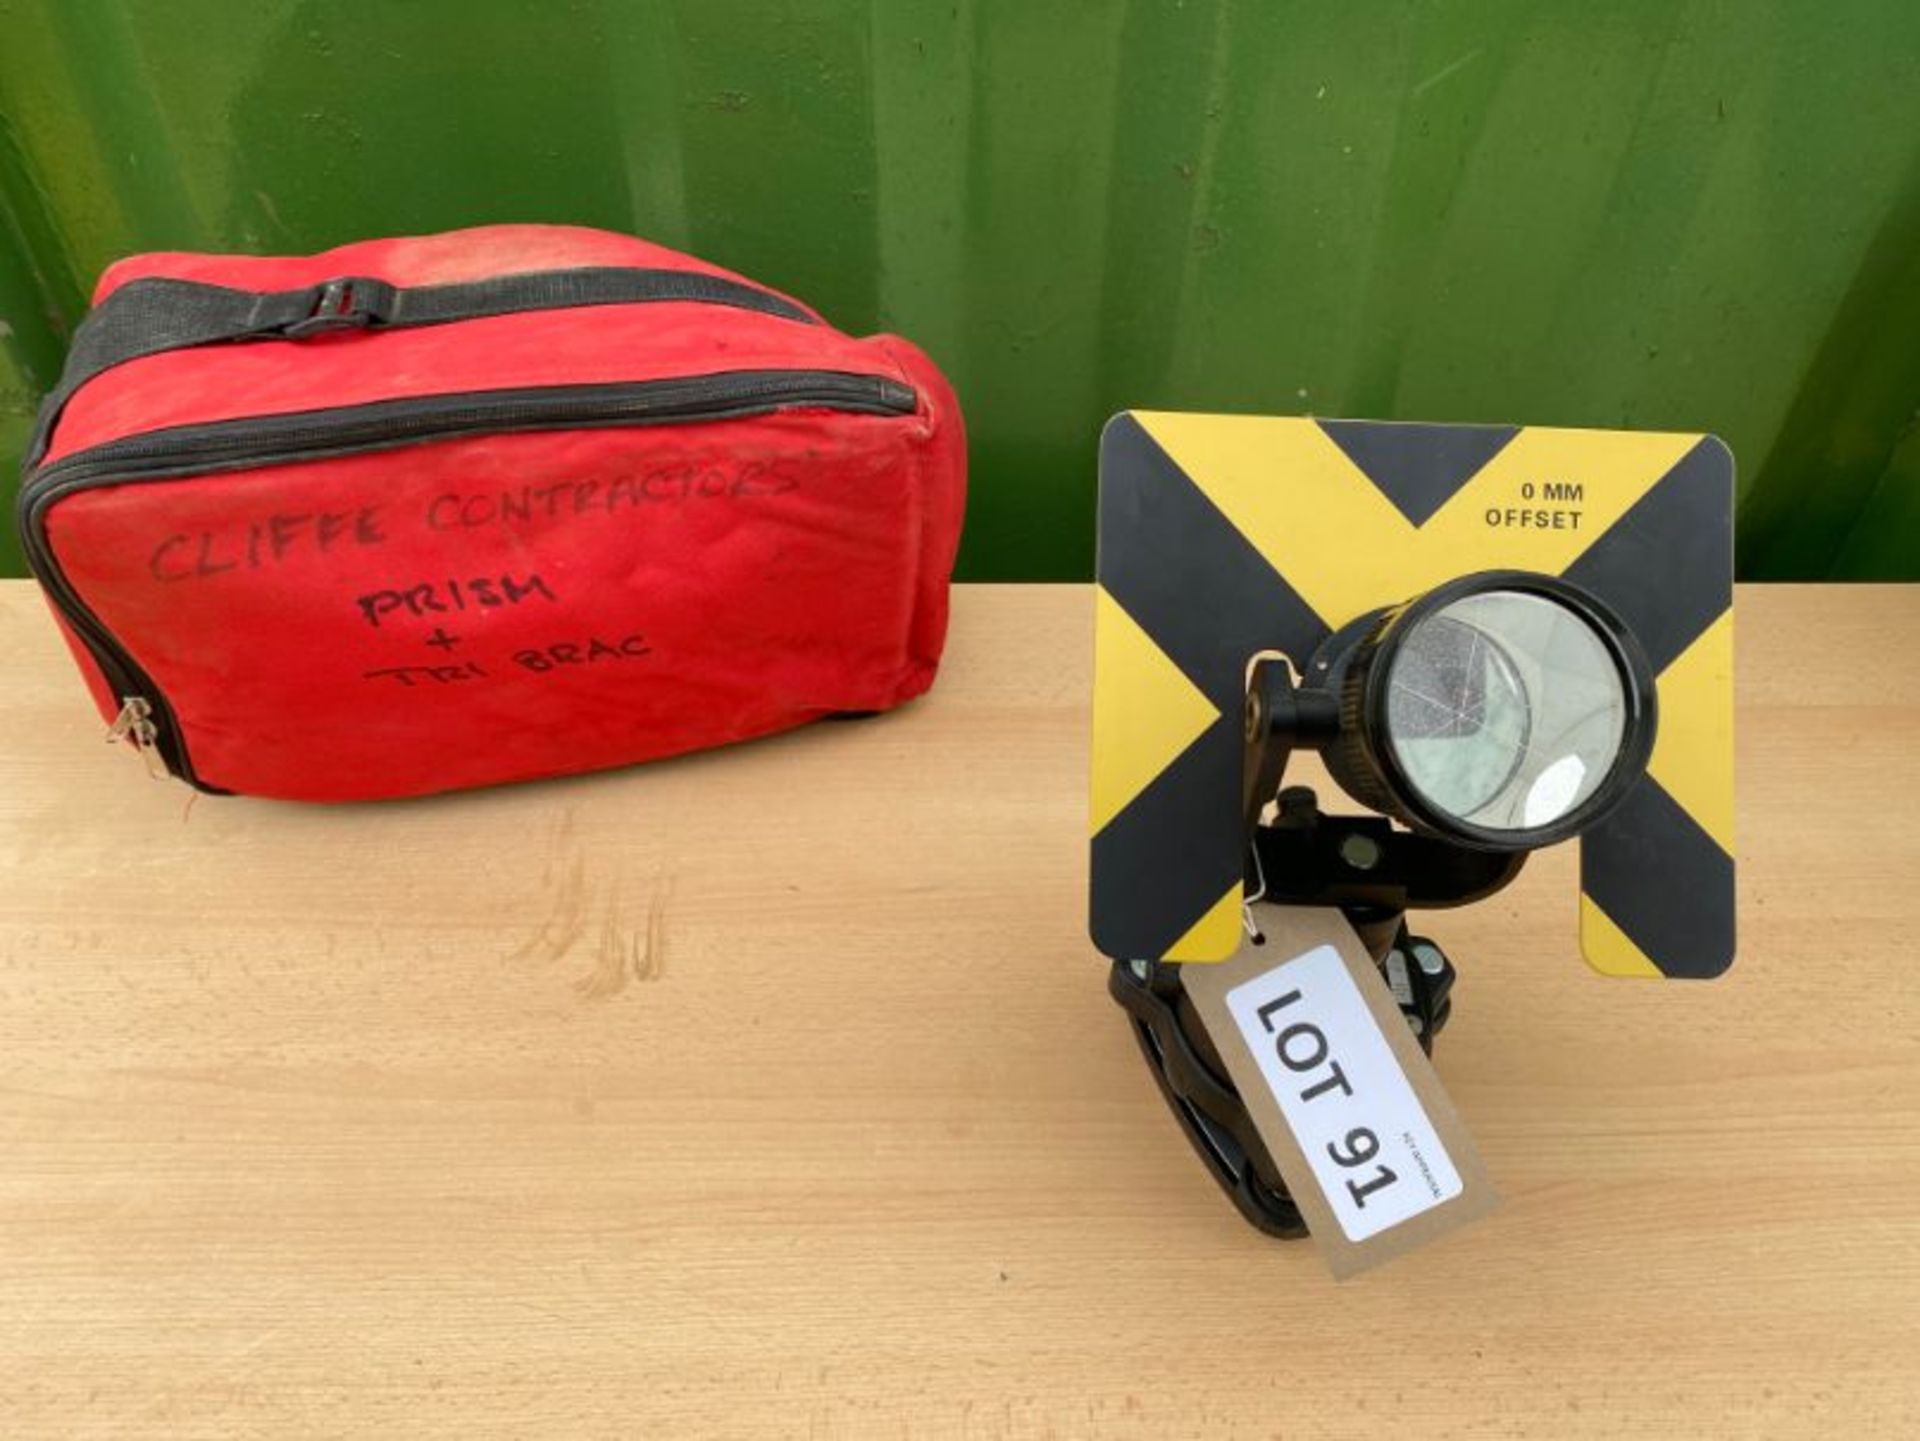 Single prism surveyors' kit with with carry bag